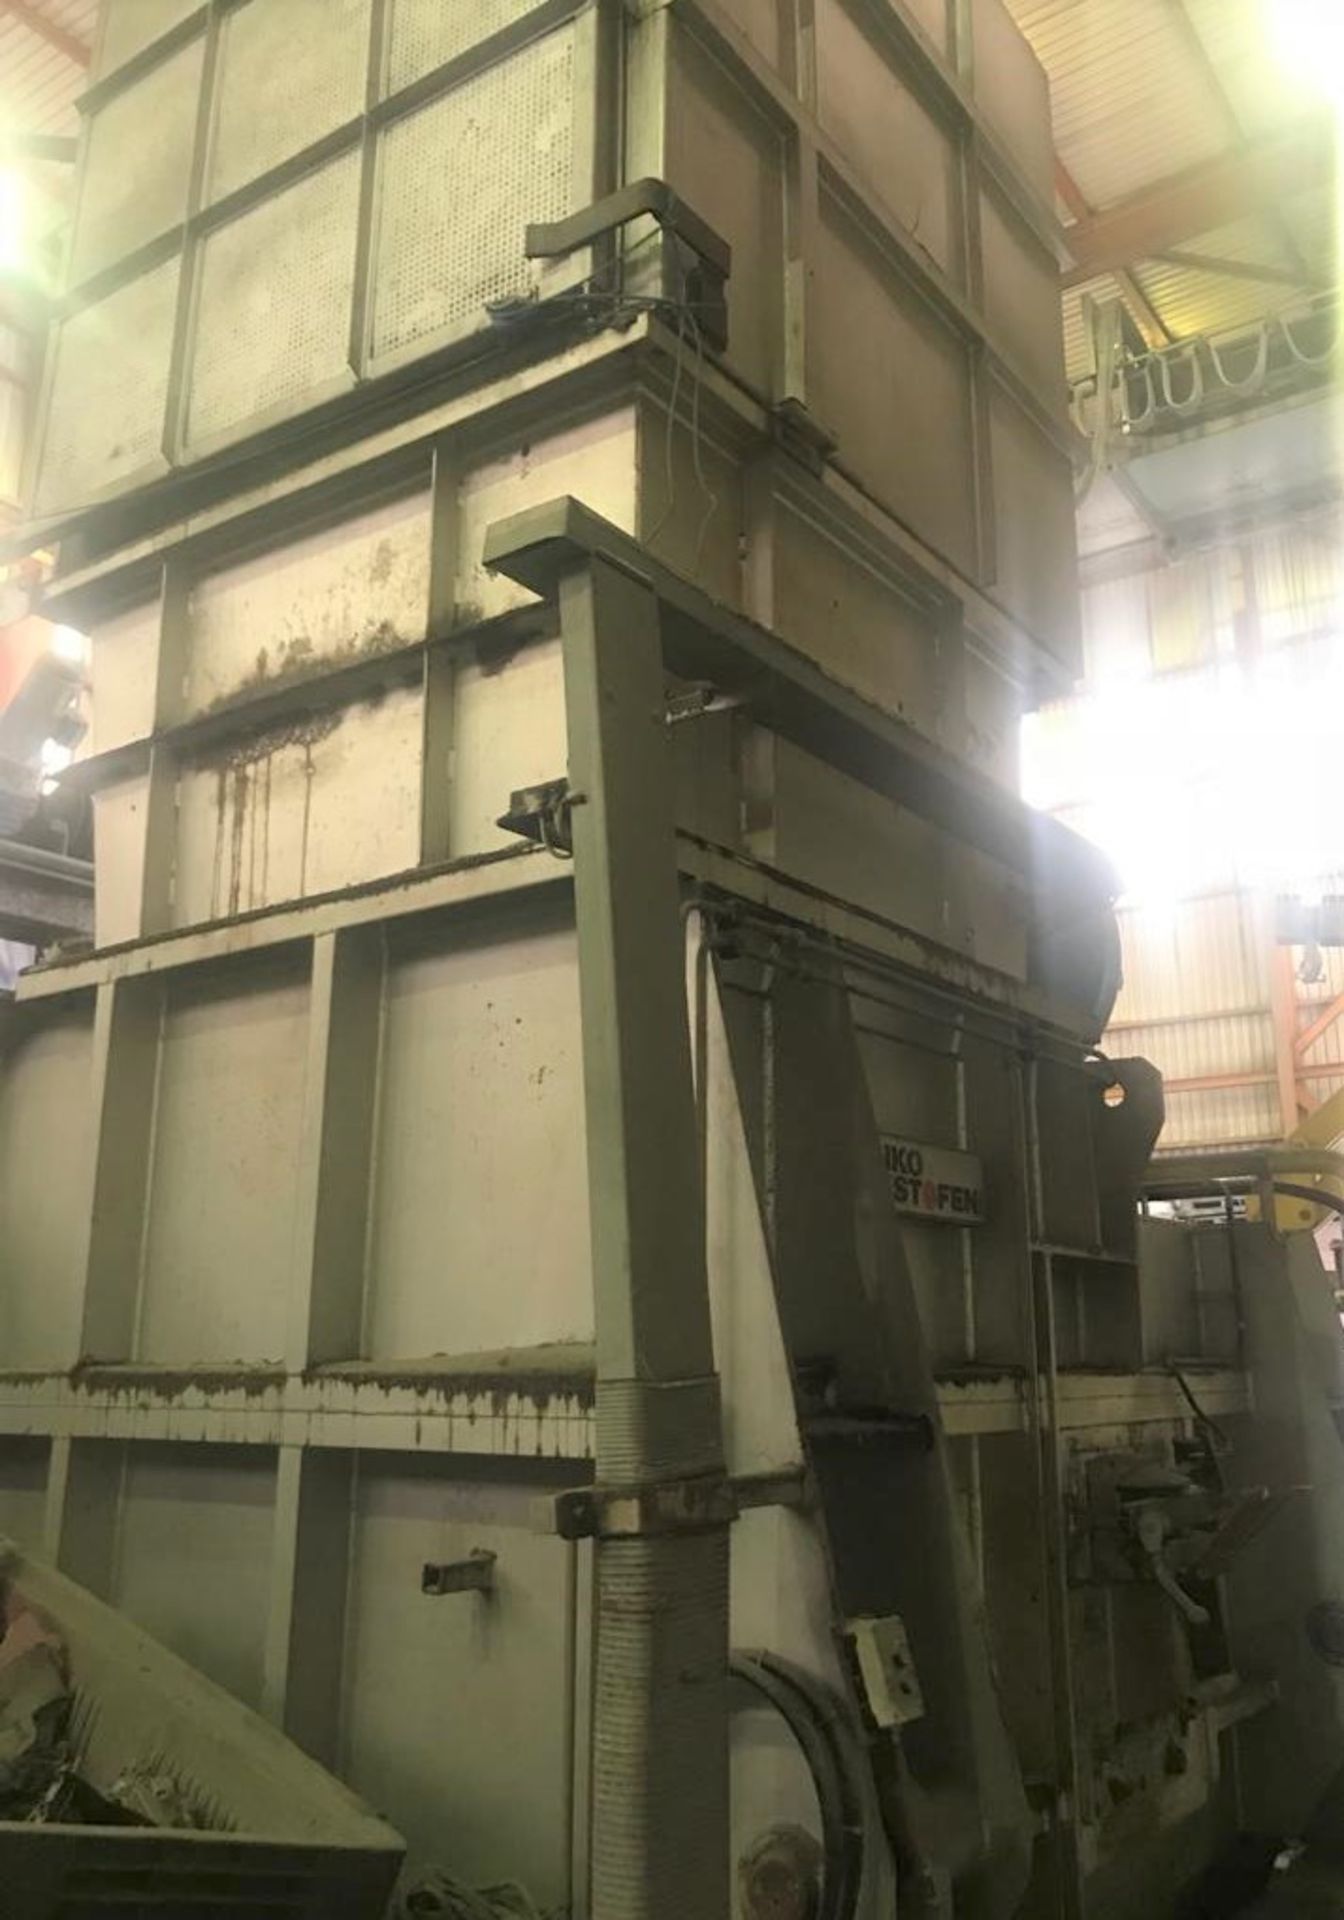 1 x Striko Westofen MH-II-T 2000/15000 G-eg Melting and Holding Furnace - CL547 - Location: South - Image 3 of 4